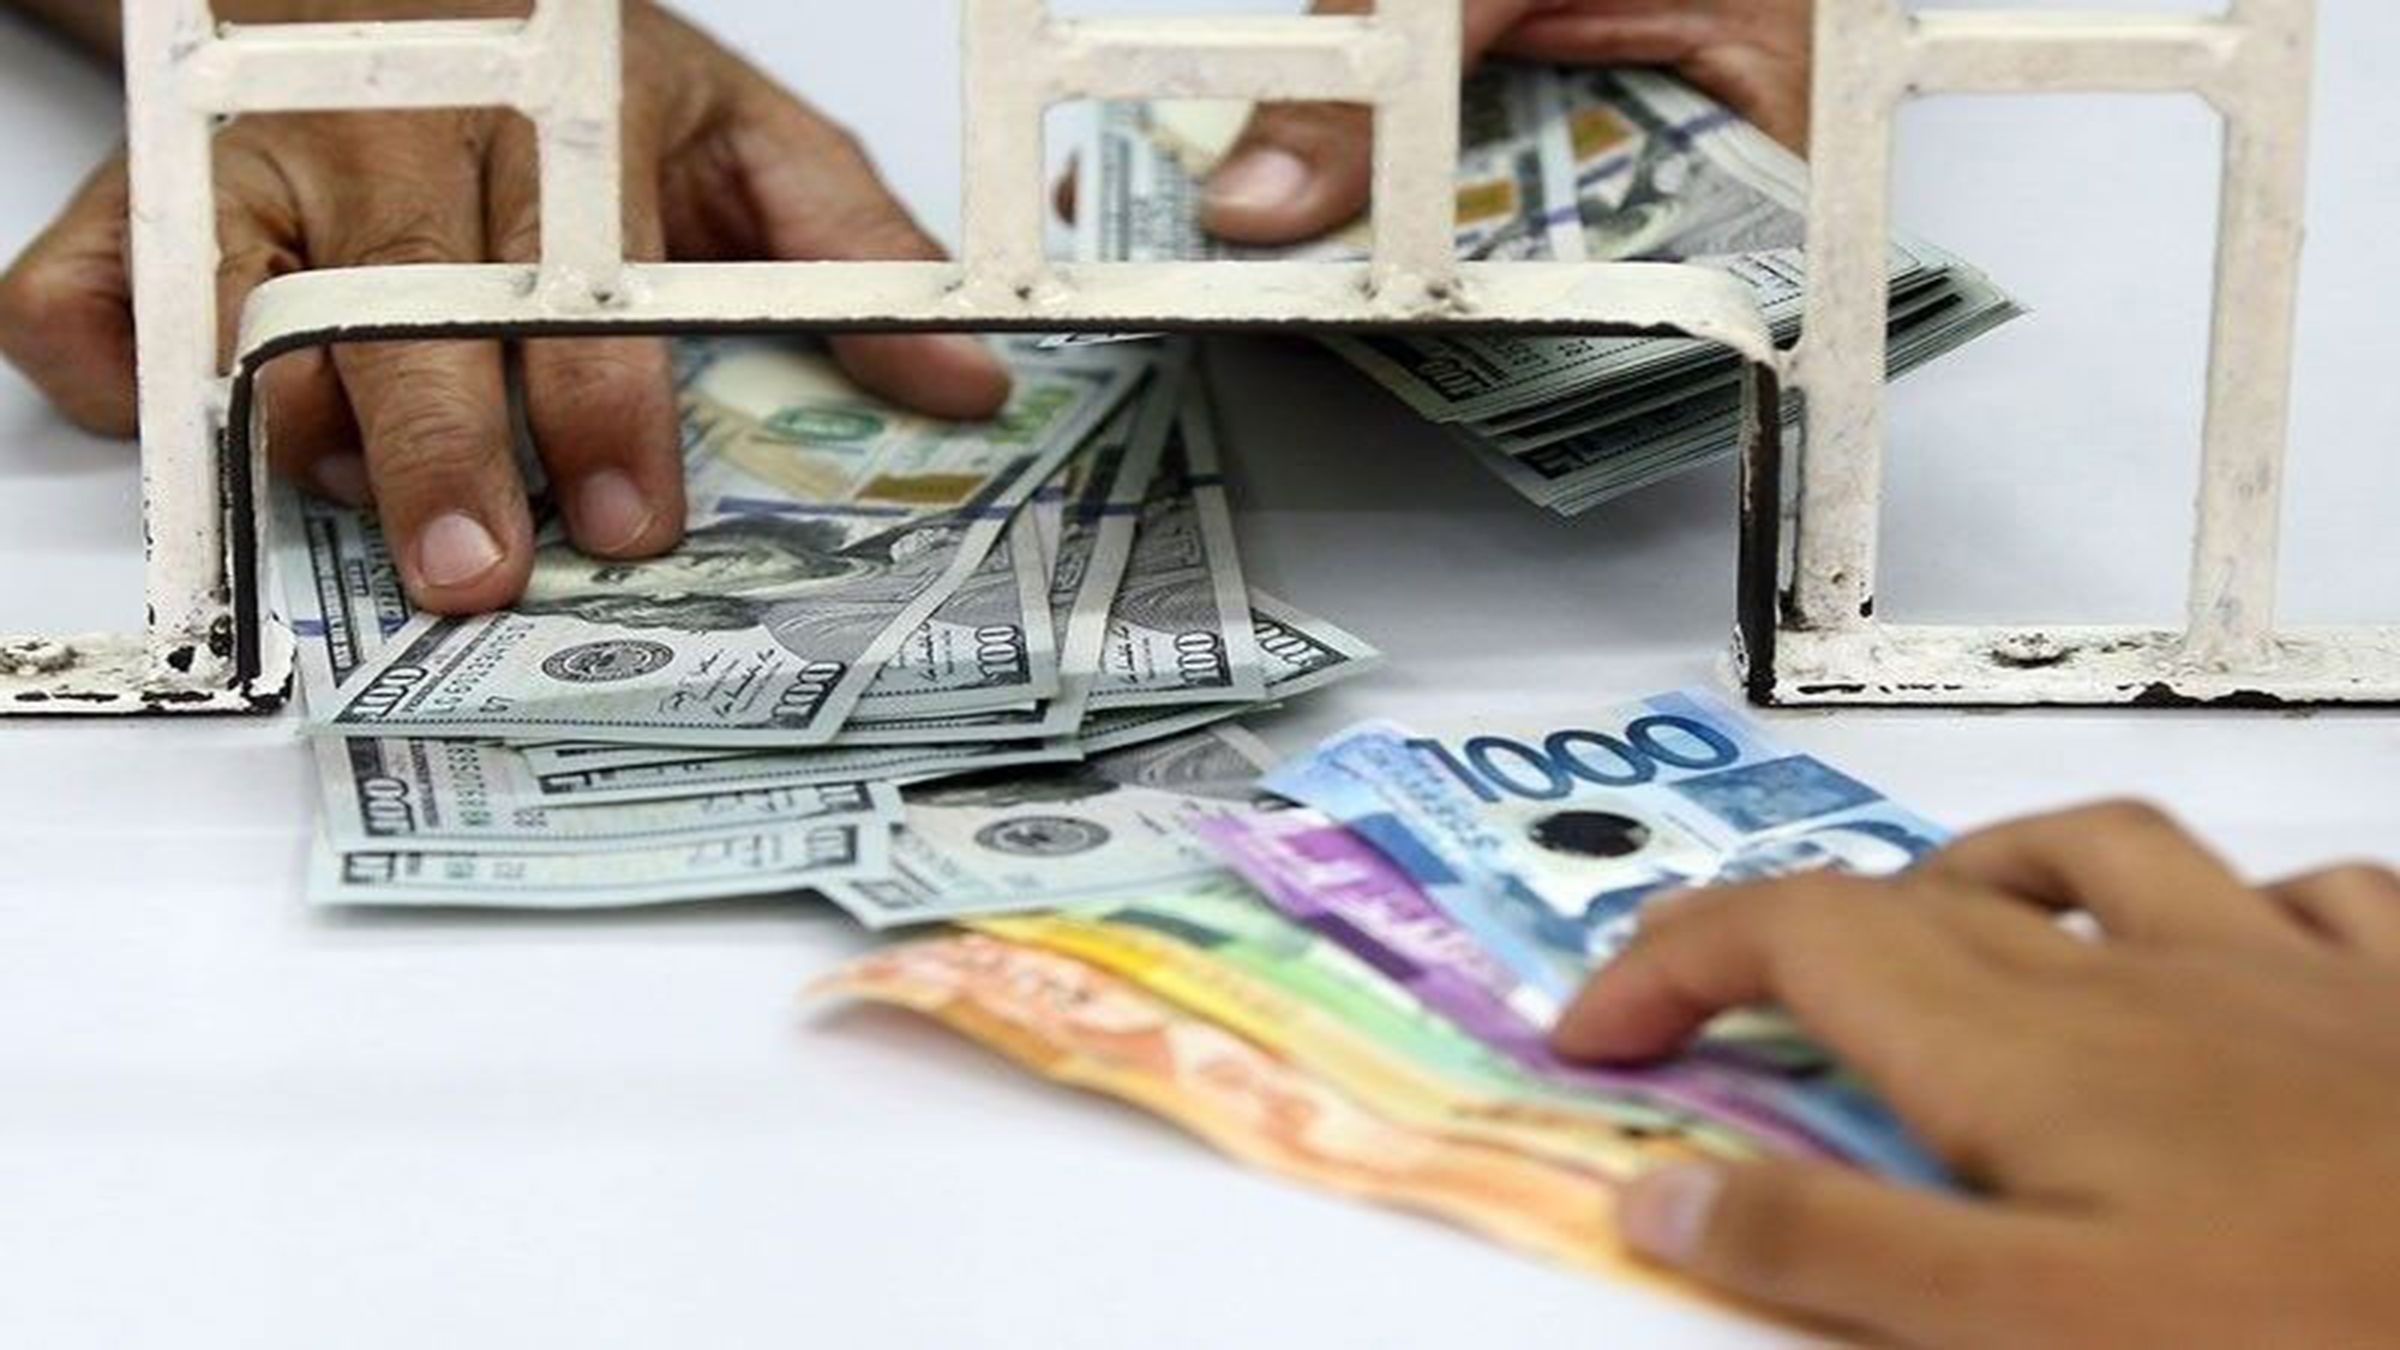 Personal remittances up by 4% in September 2022